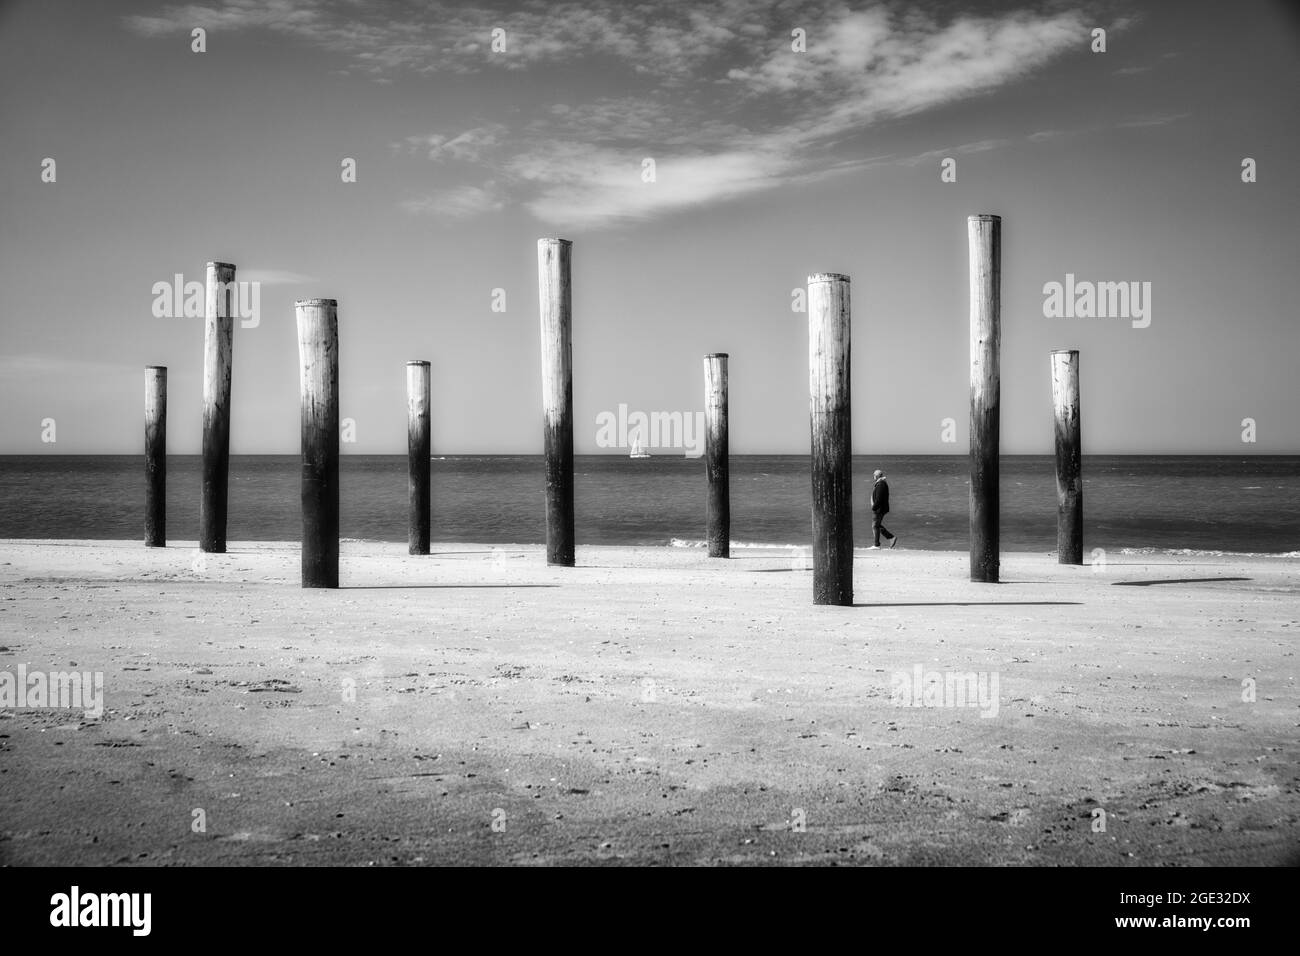 The Netherlands, Petten, Beach. North Sea. Palendorp. Artwork with poles. Man, sailing boat. Stock Photo